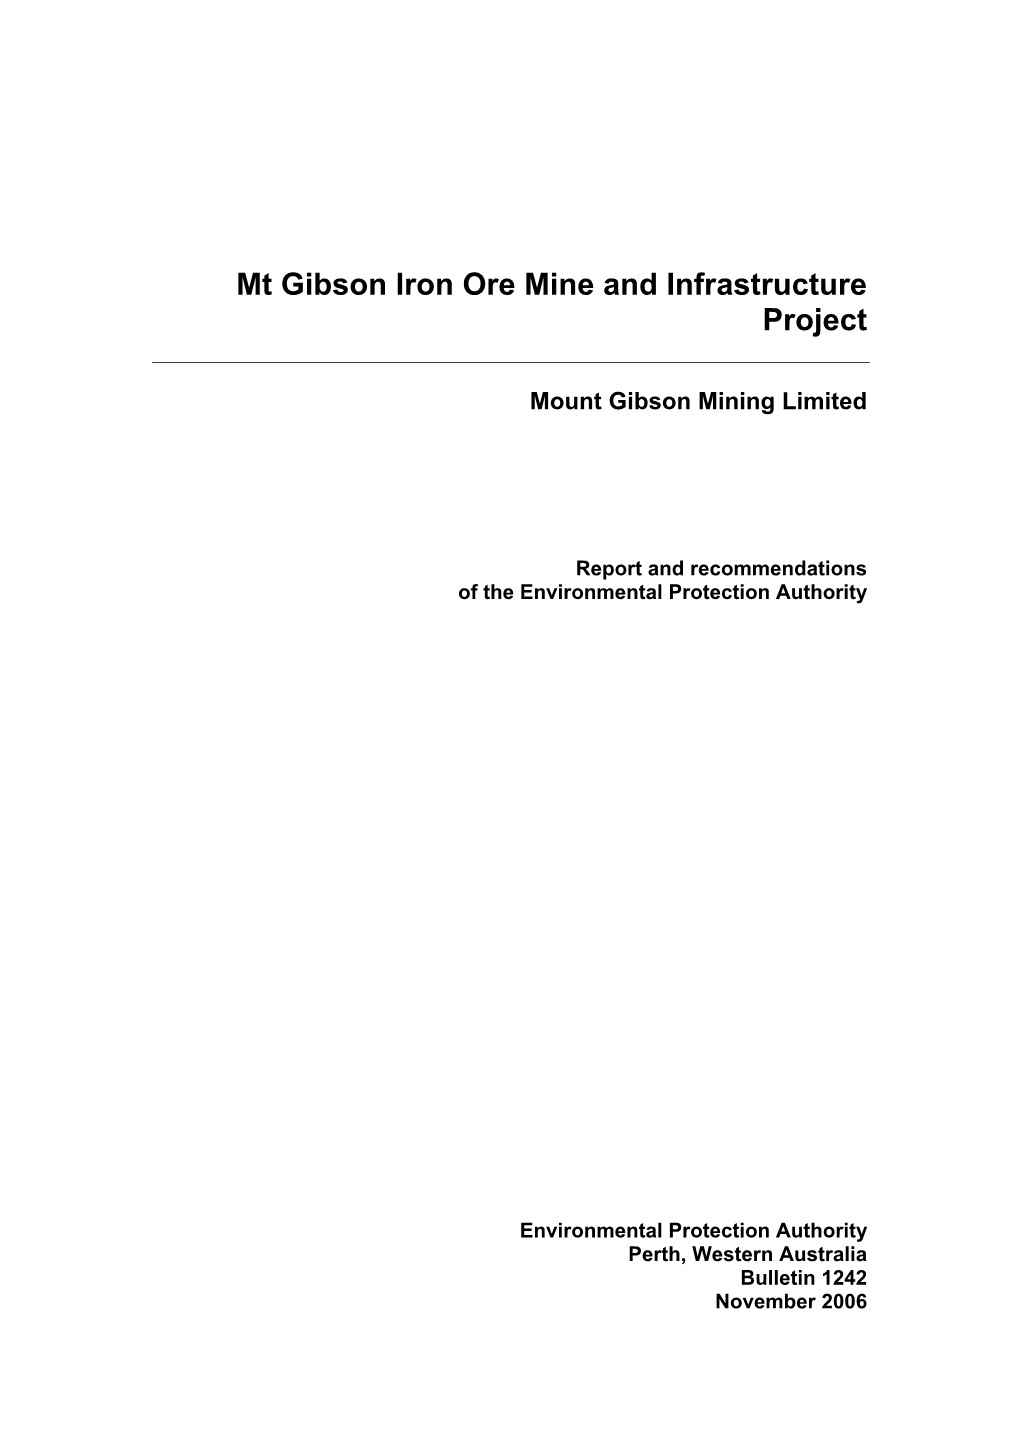 Mt Gibson Iron Ore Mine and Infrastructure Project